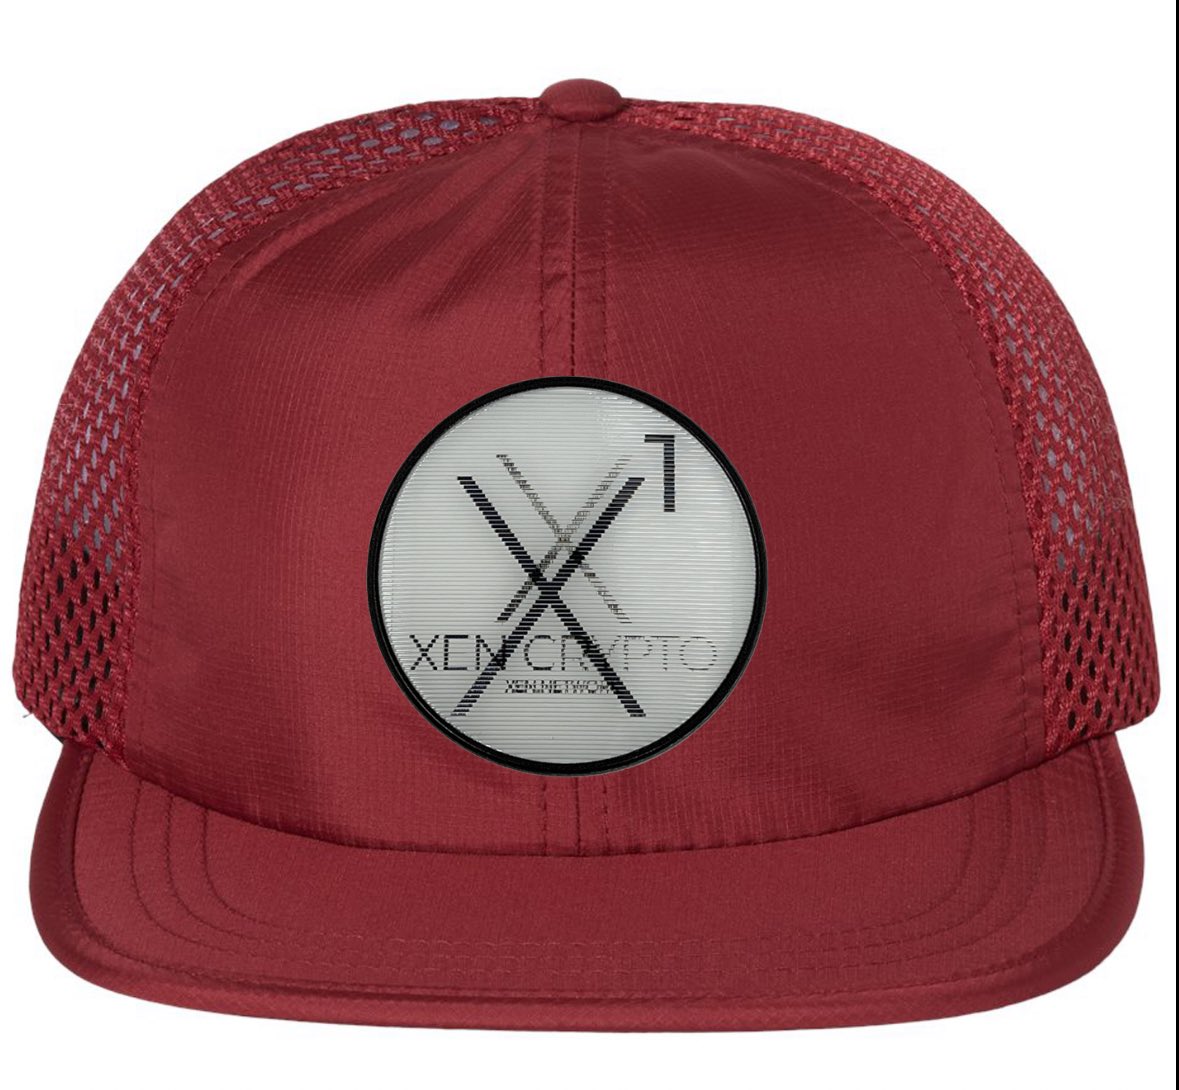 Looking real #XEN, sir! 🧘

Sorry for the delay, we’re working on something super-special for both you and @ackebom!

This Gold-Embossed $XEN cap is available in both dark red and black mesh caps exclusively @XenCryptoStore. #XenMerch 

Richardson Performance Trucker Cap - BLACK